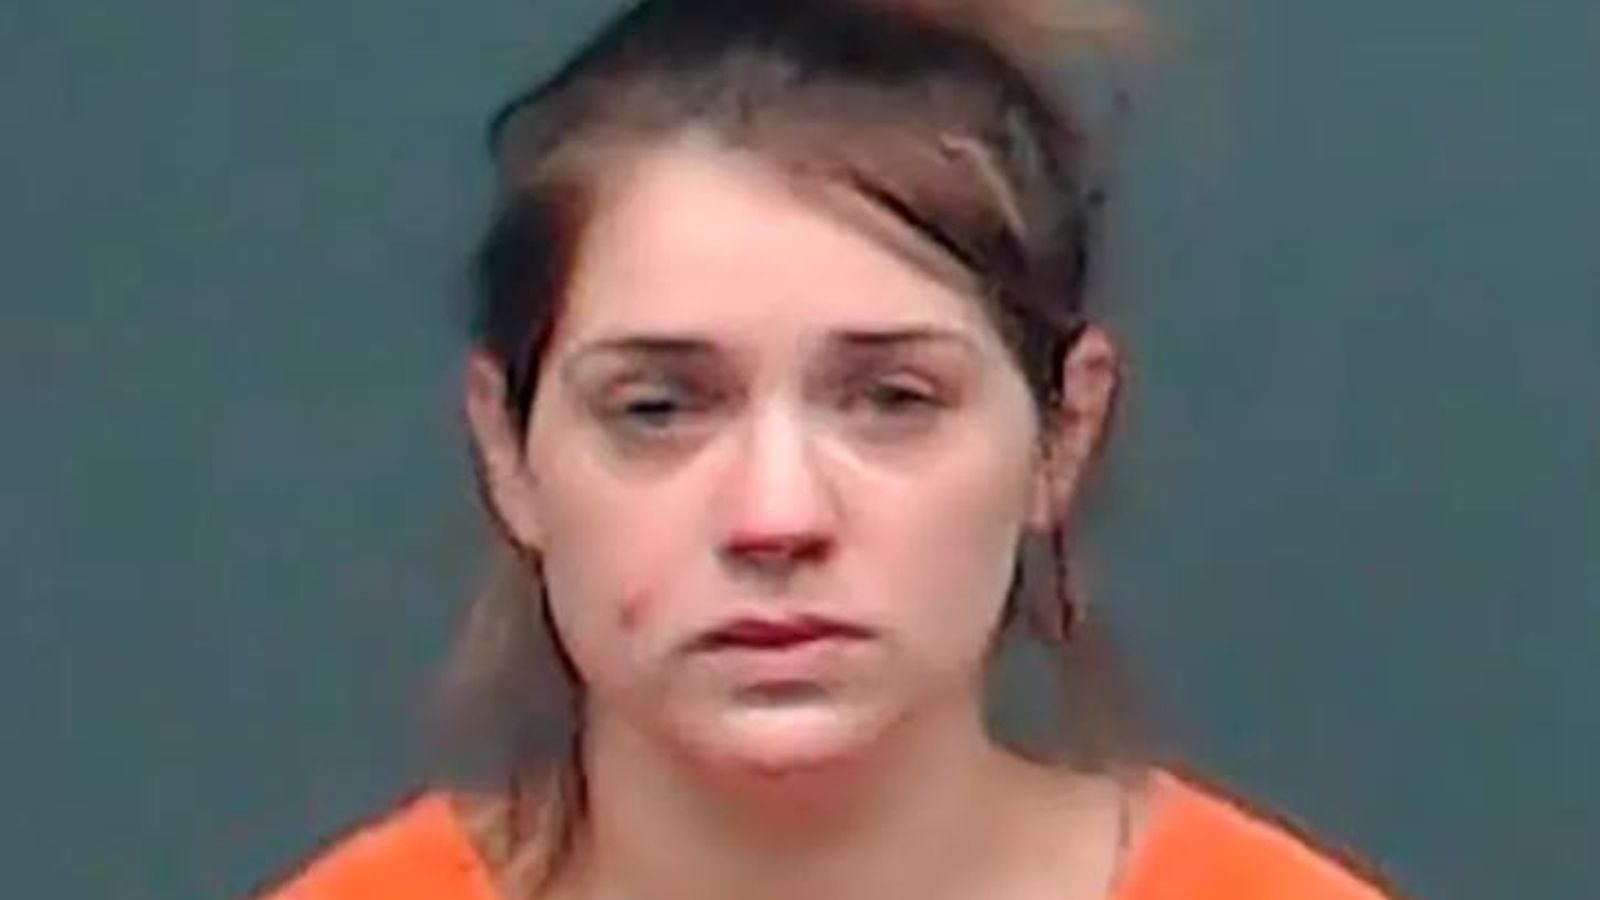 Texas: Woman convicted of killing 21-year-old mother-to-be and cutting baby from her womb